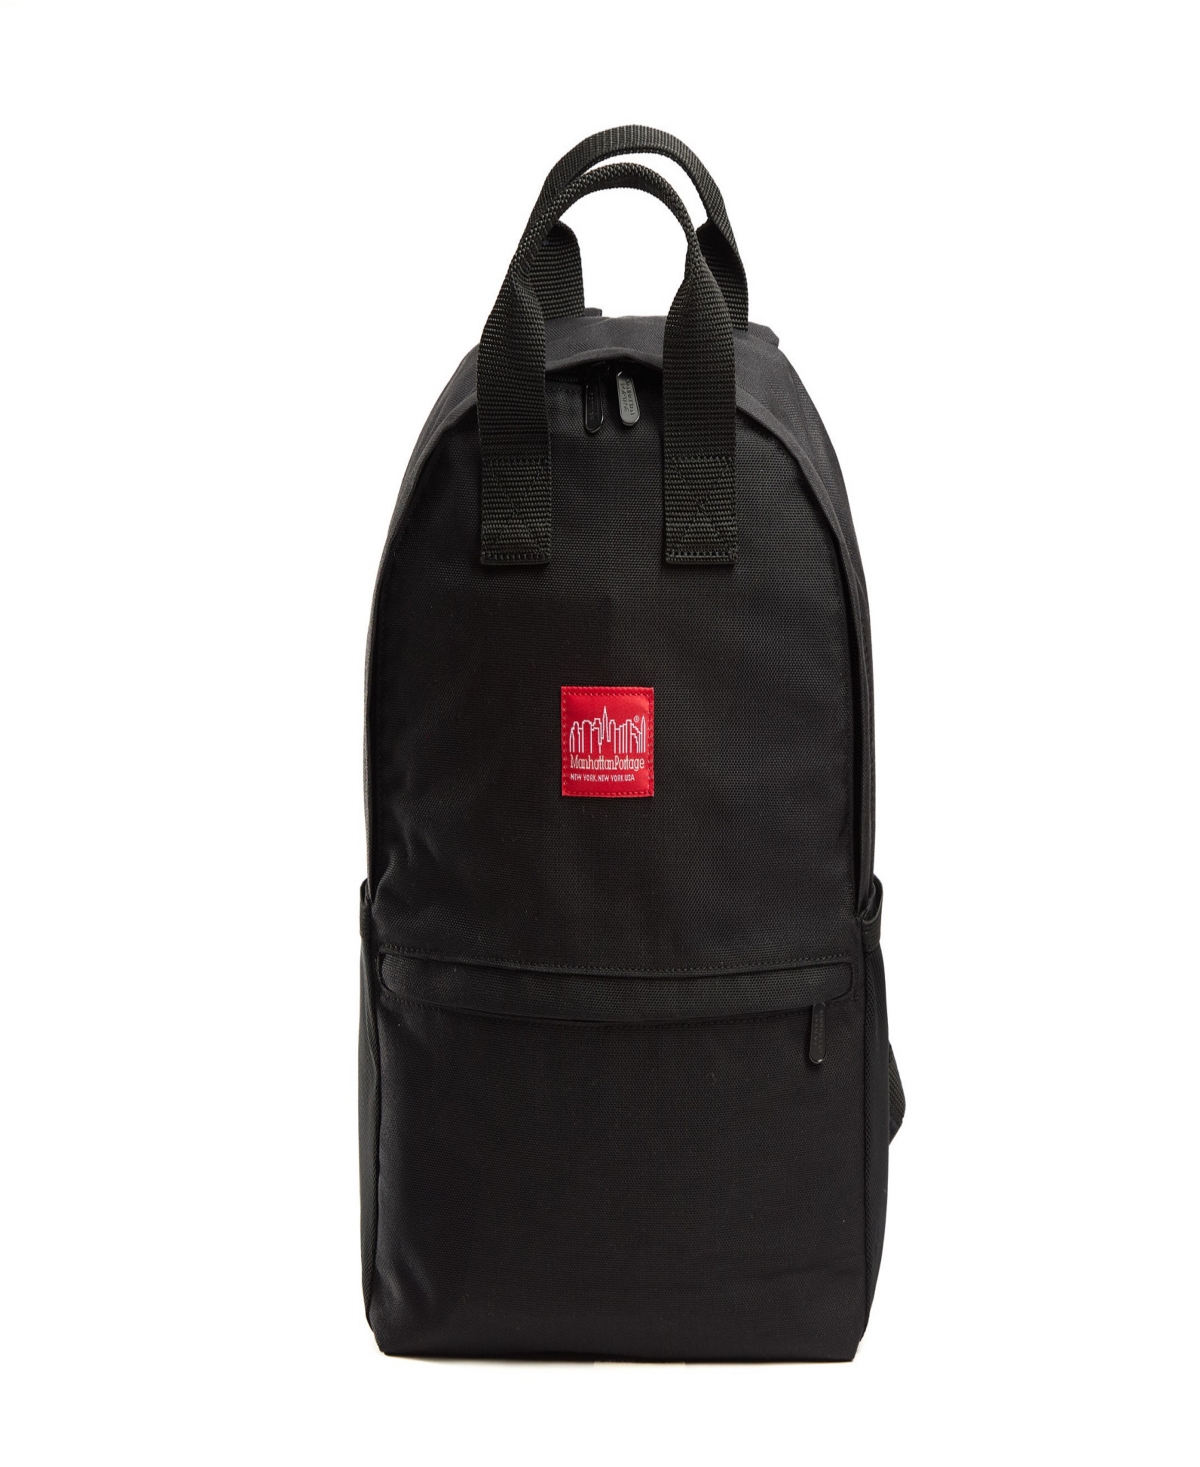 Fabric Governors Backpack - Black